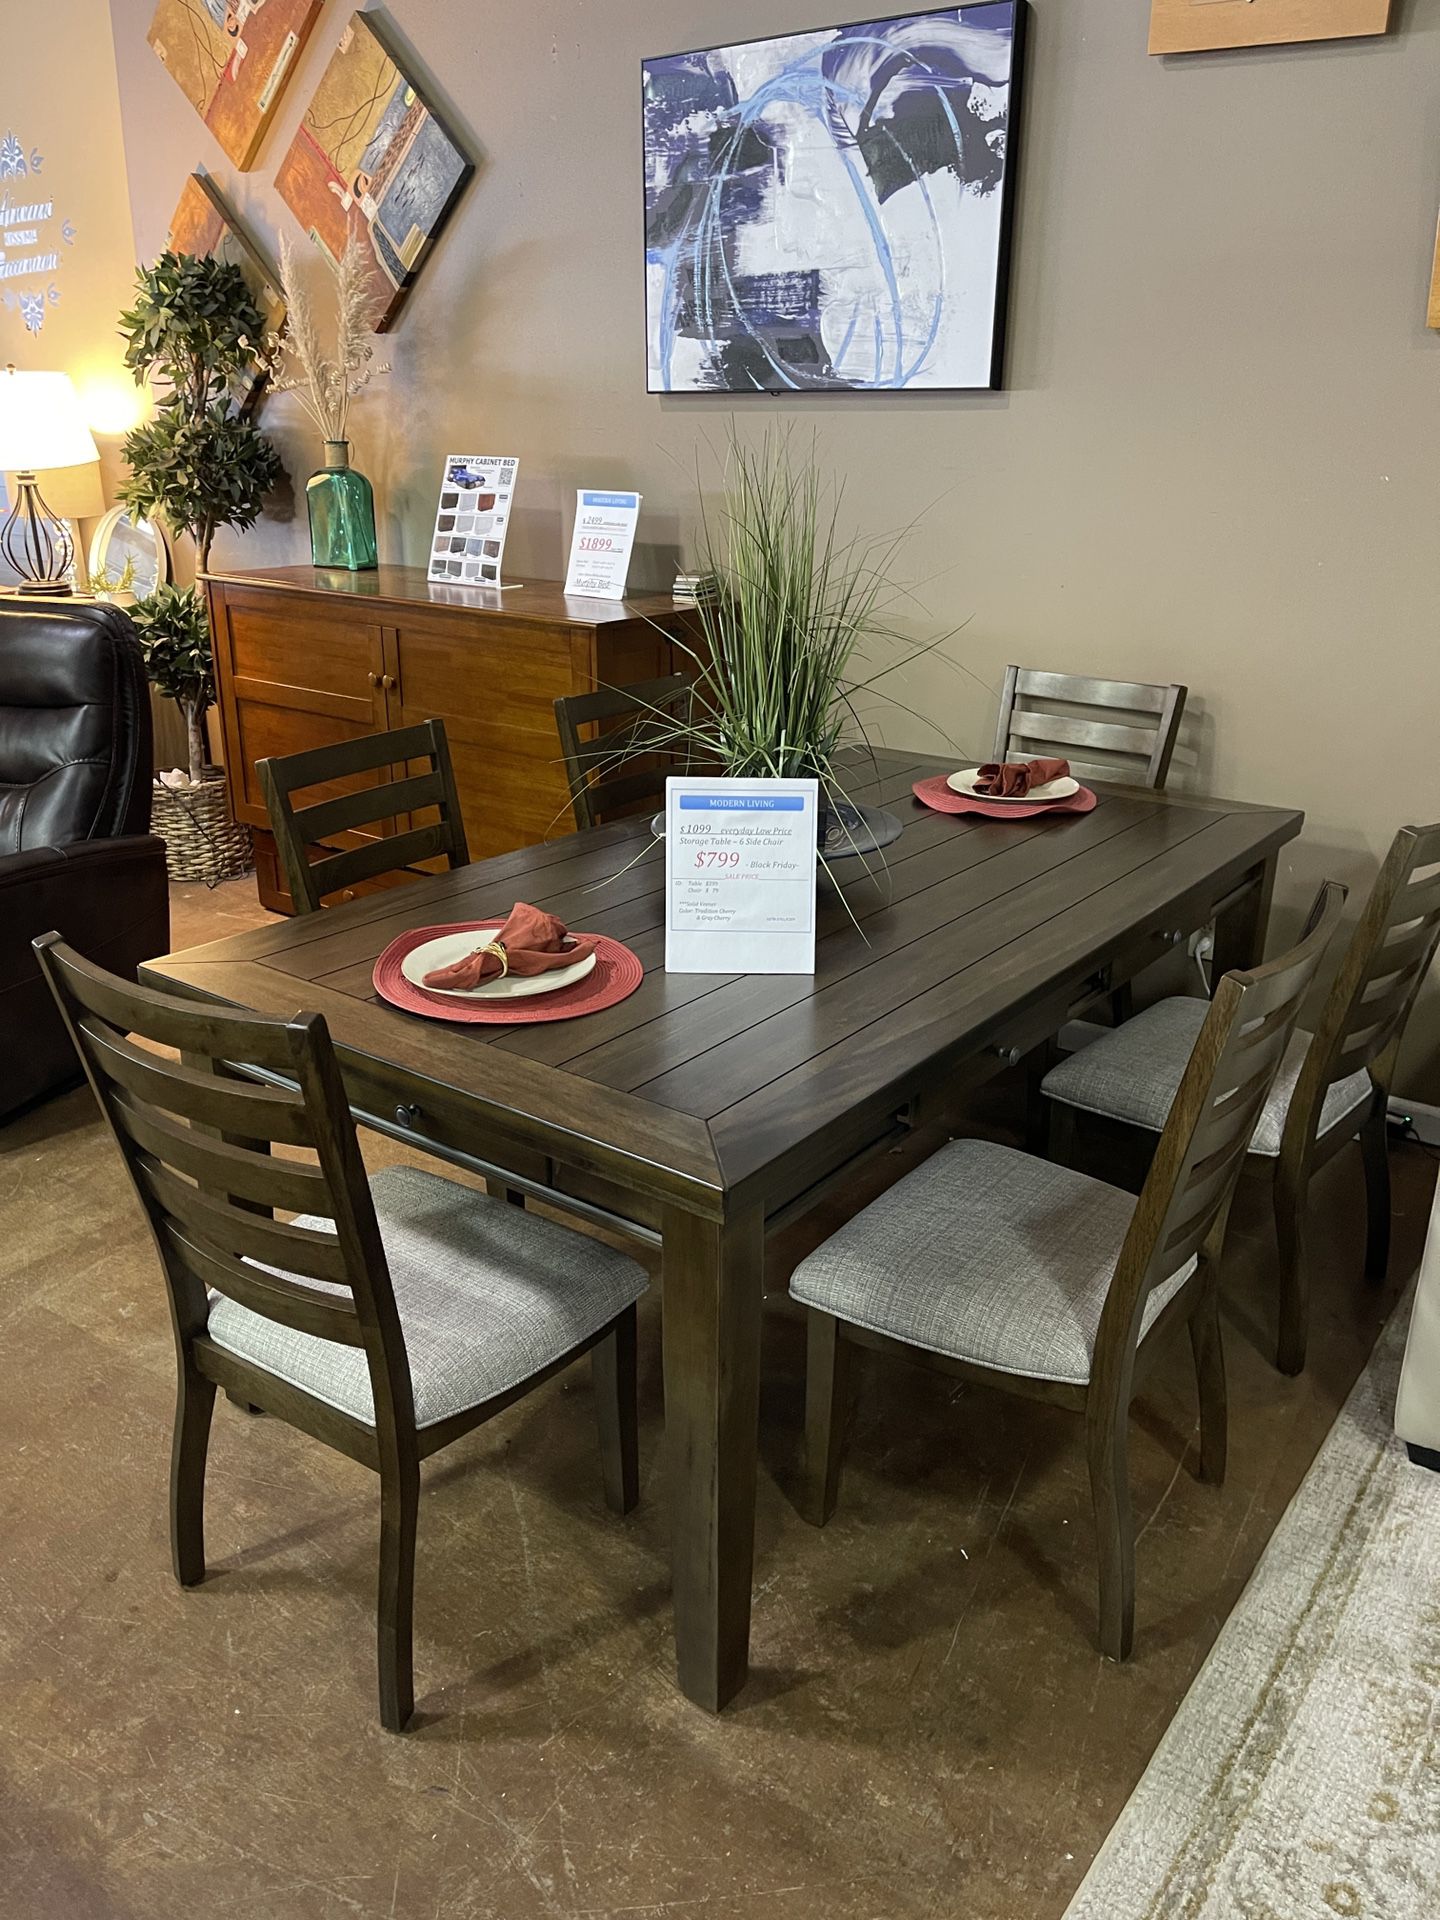 Dining Set Table With 6 Chairs 